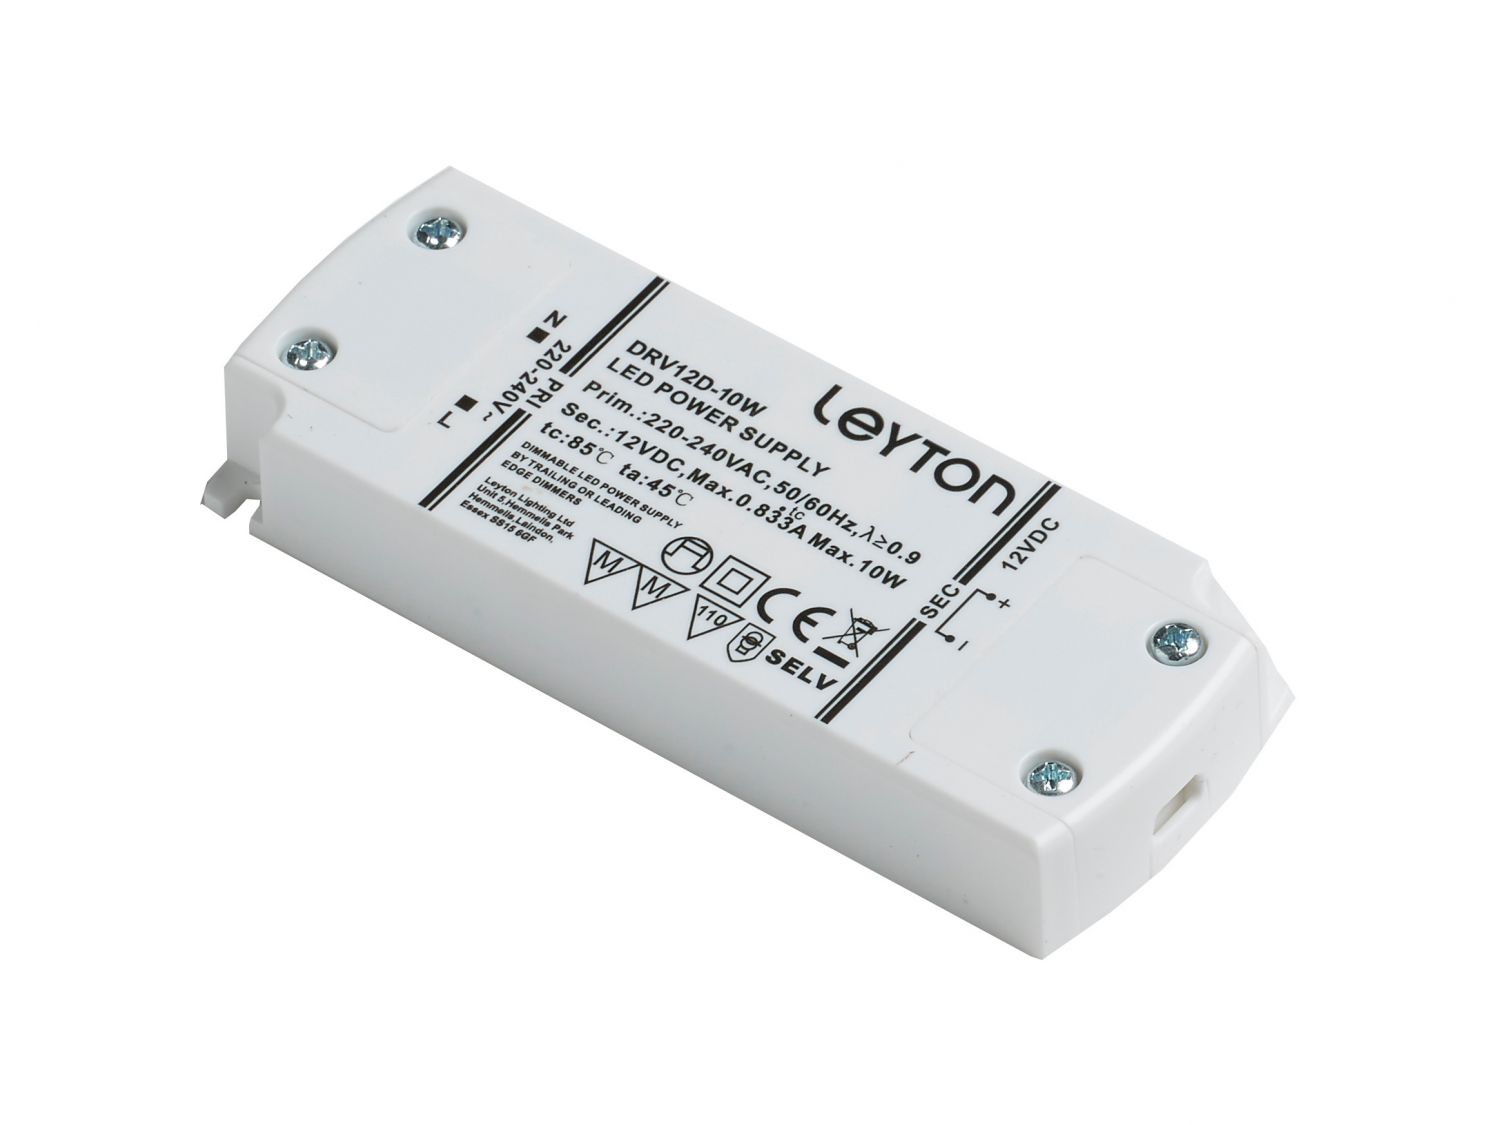 https://www.mygreenlighting.co.uk/images/products/white/12v-10w-mains-dimmable-led-driver-top-output-socket-24324-1500x1125-p14661-v1596451999.jpg